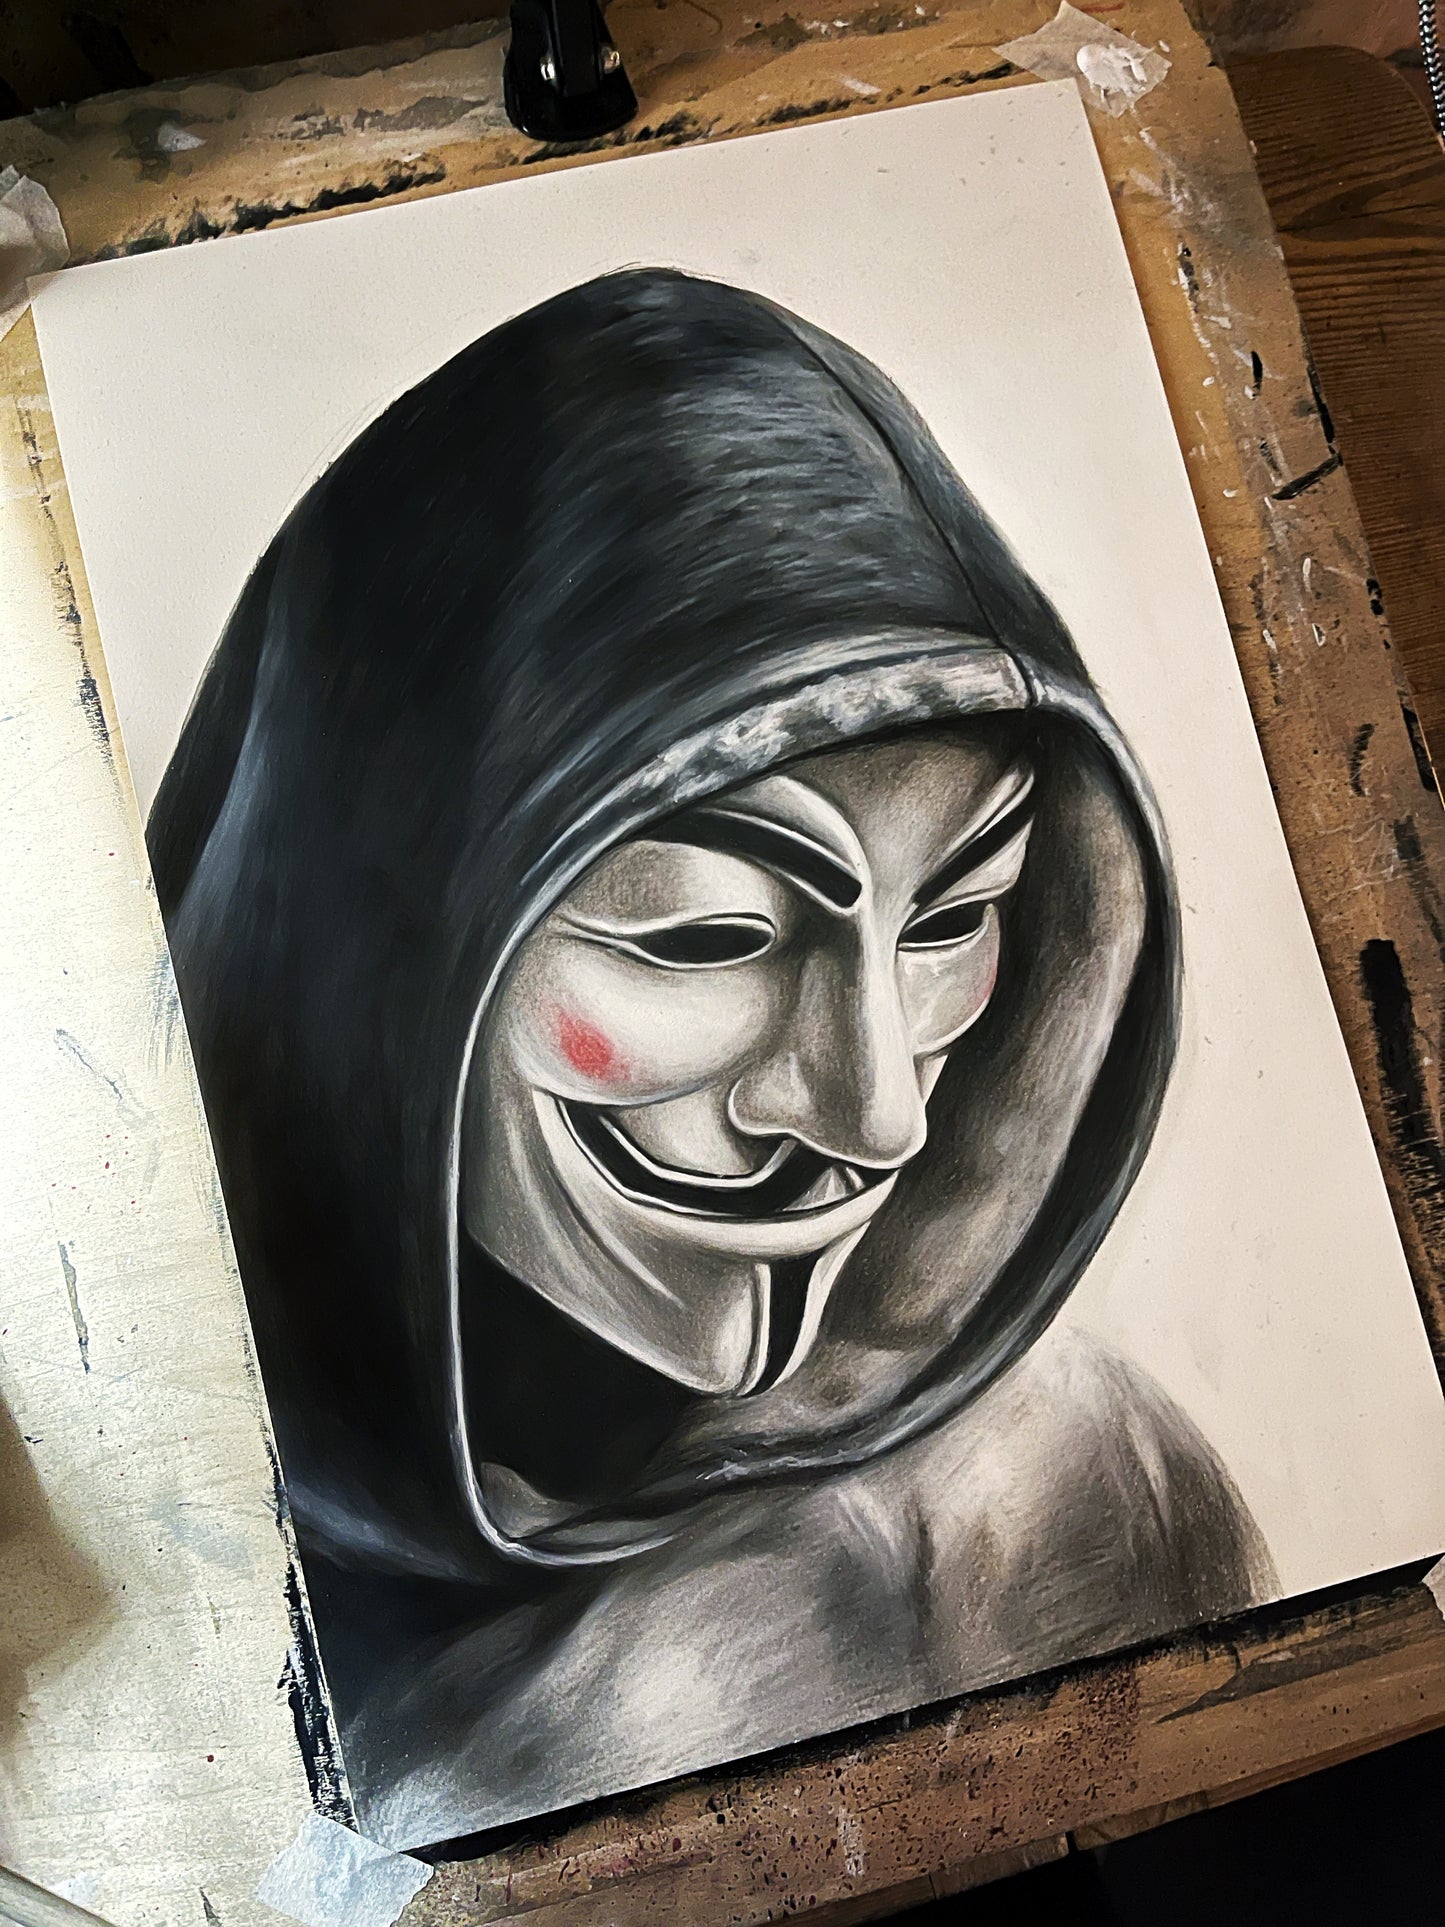 GUY FAWKES